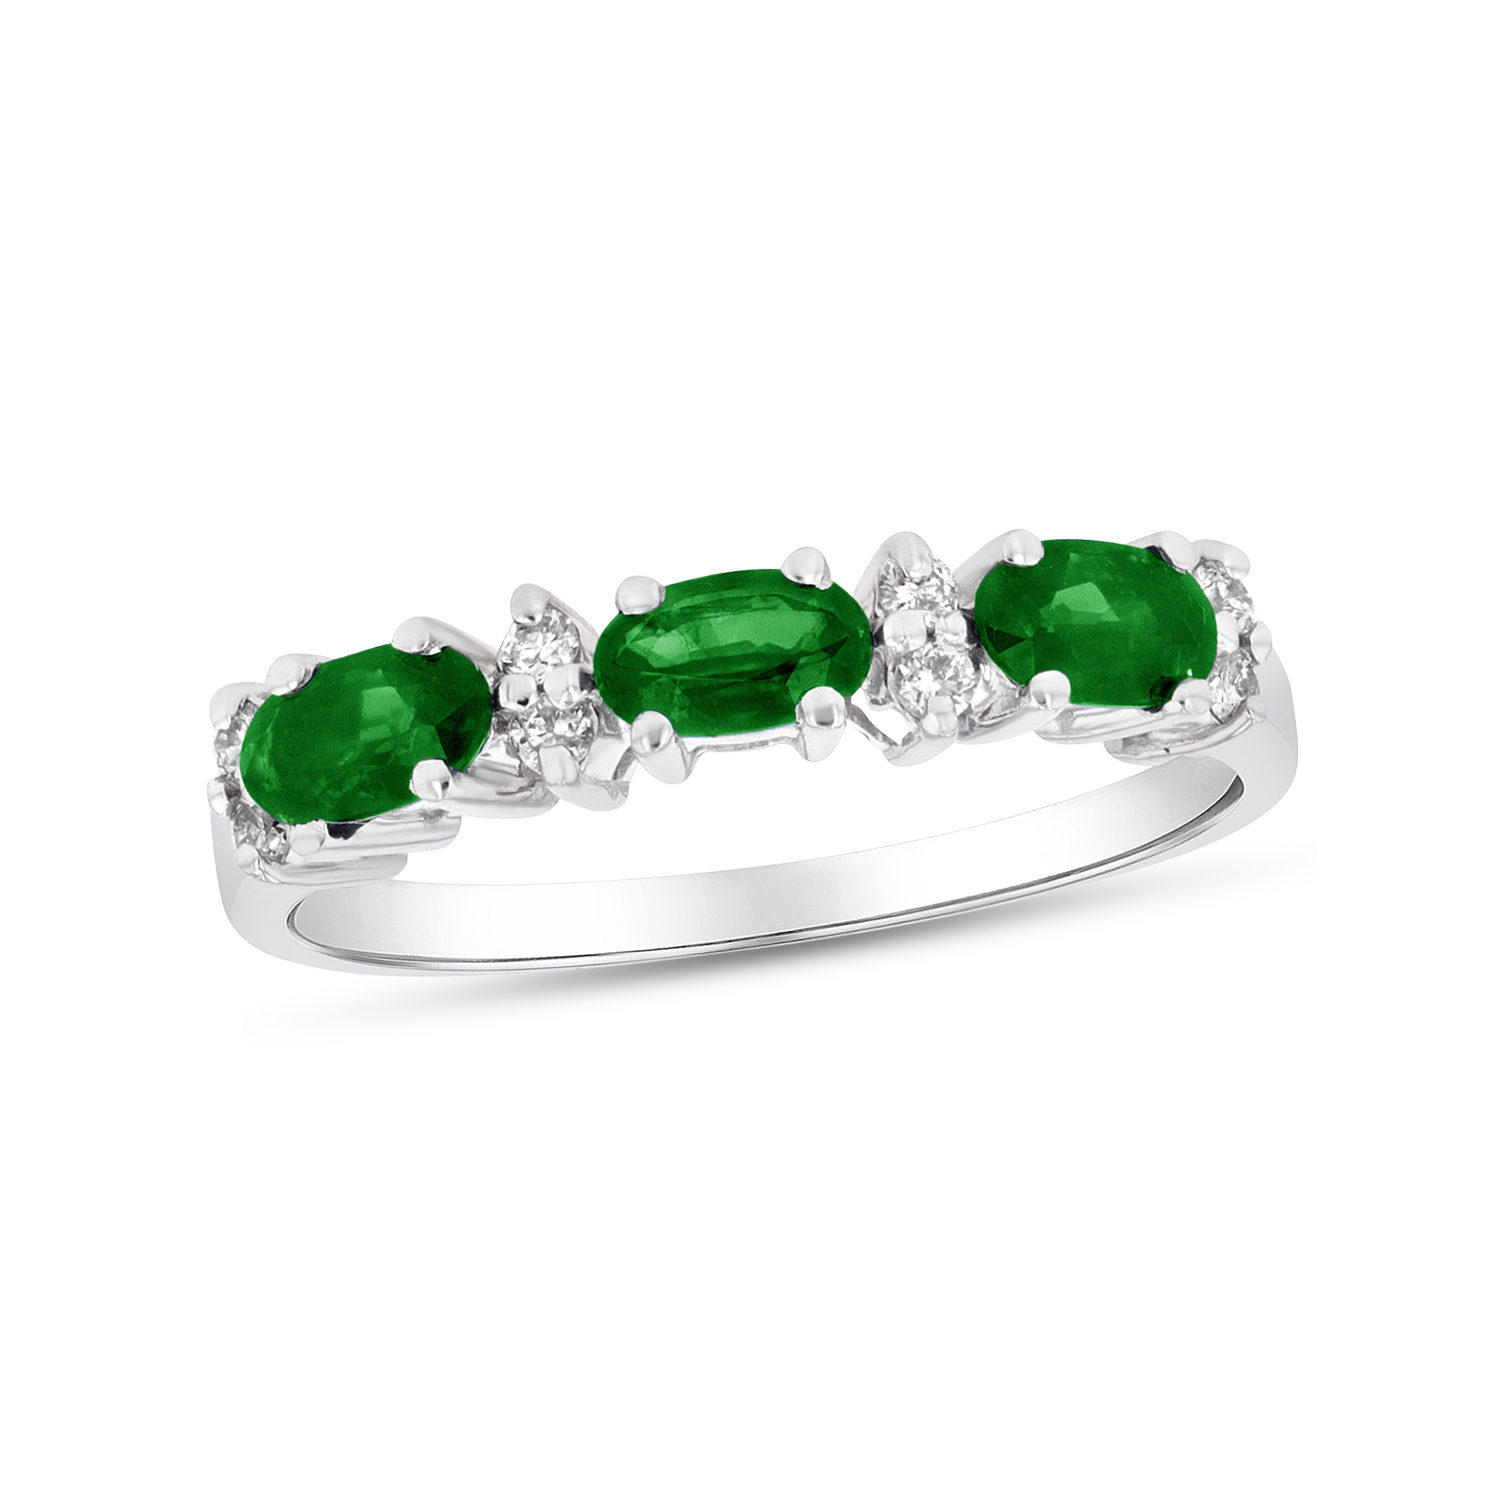 View 0.75ctw Diamond and Emerald Band in 14k White Gold